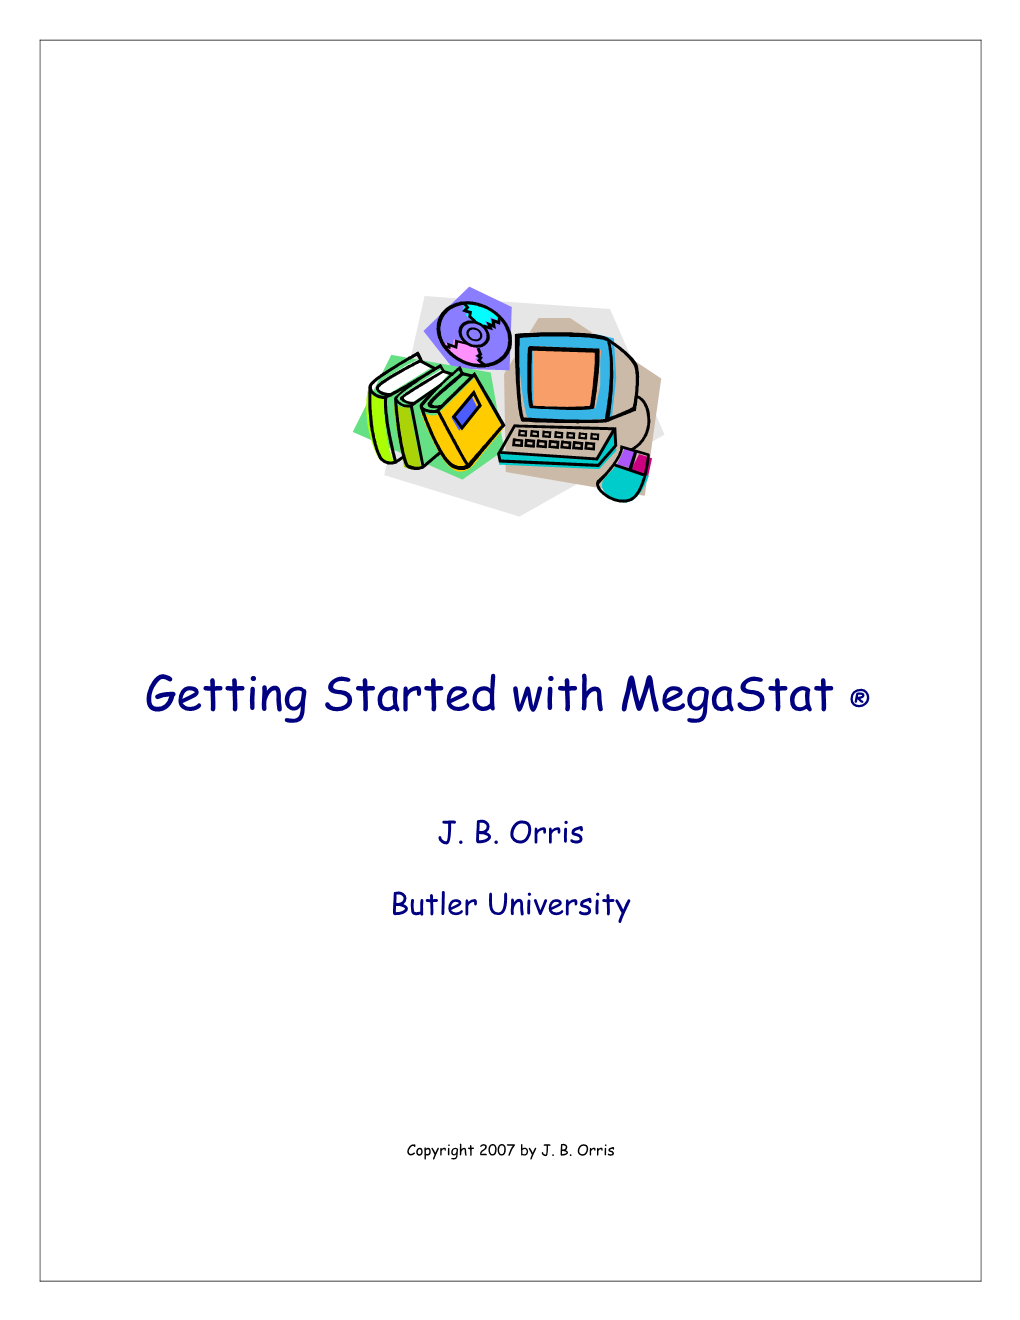 Getting Started with Megastat